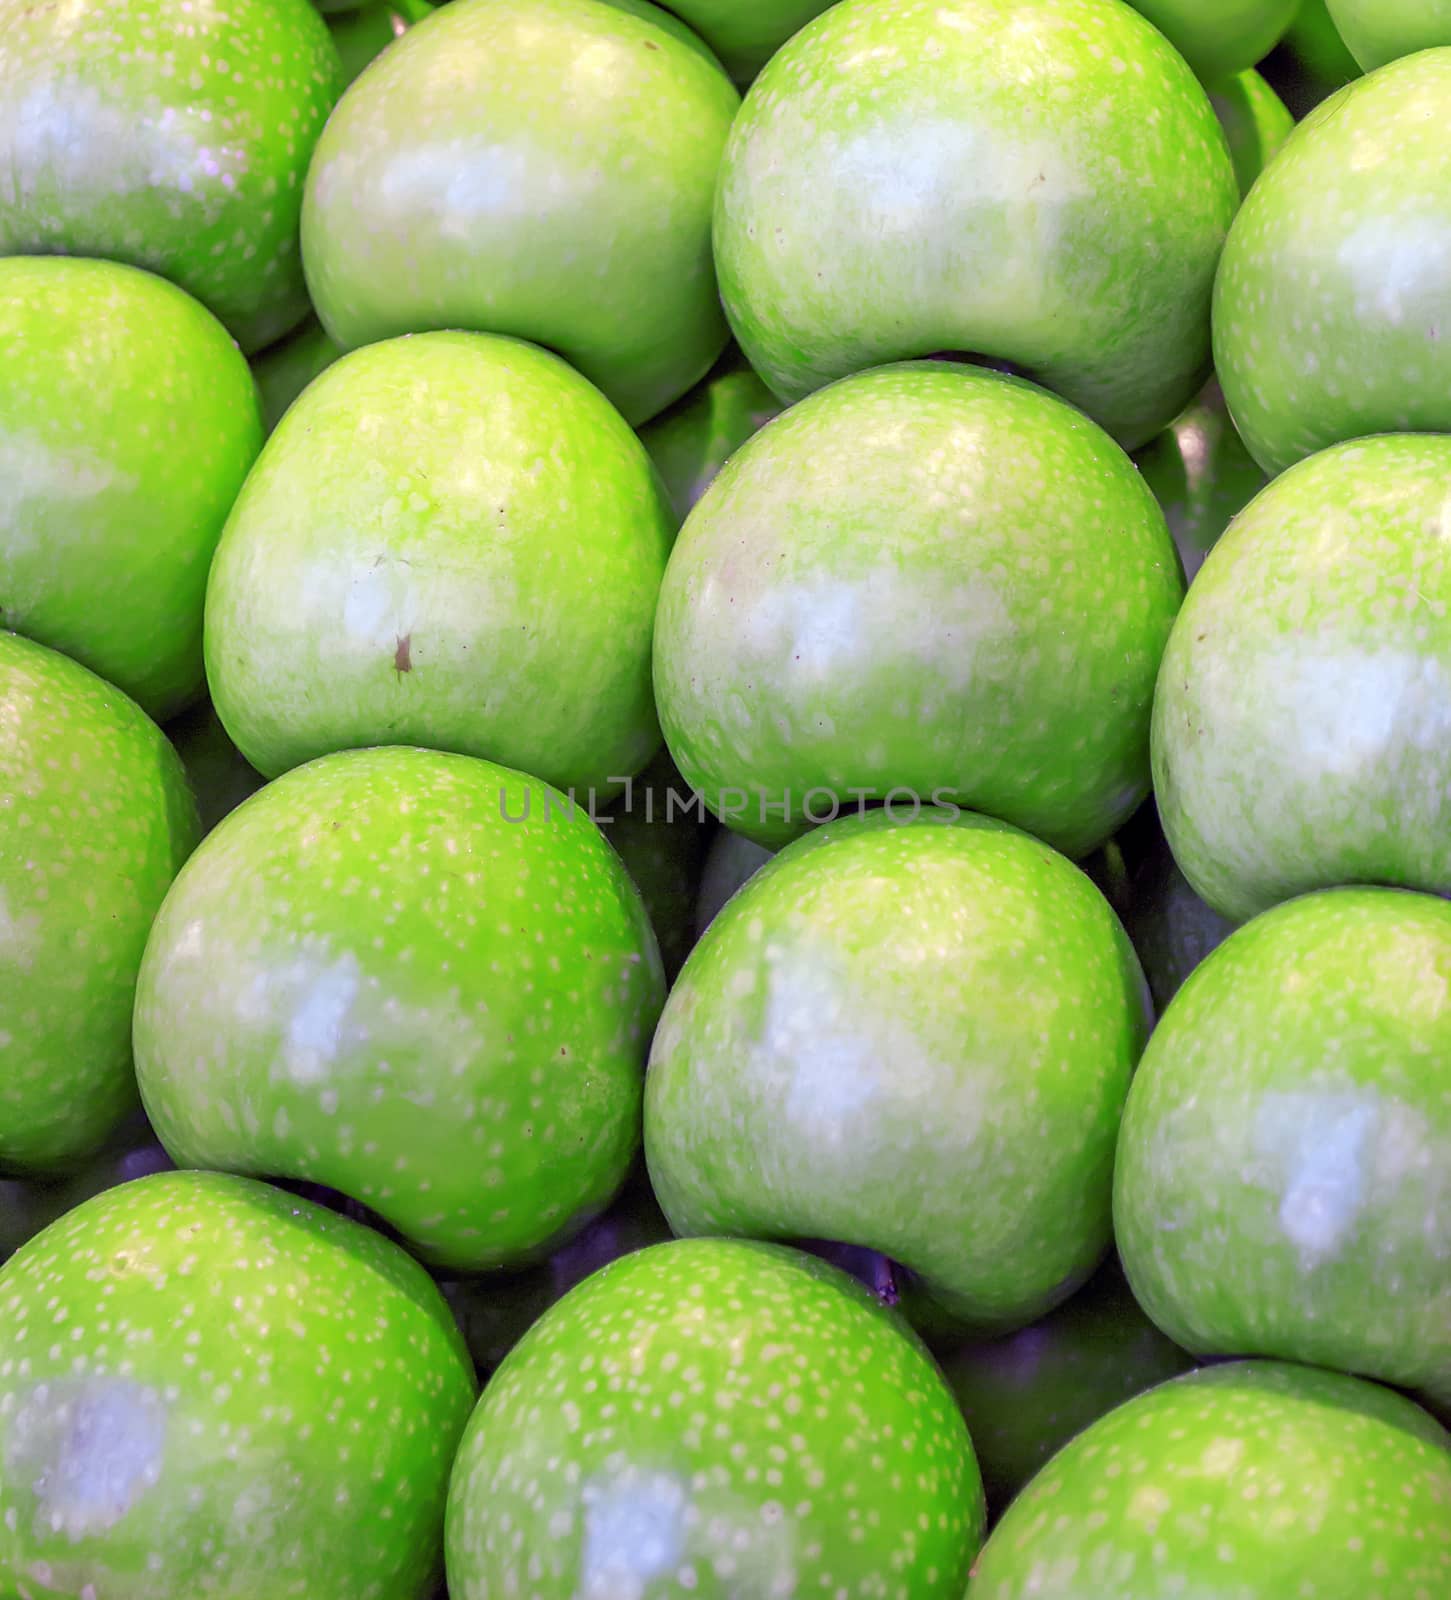 Bunch of green apples in a market